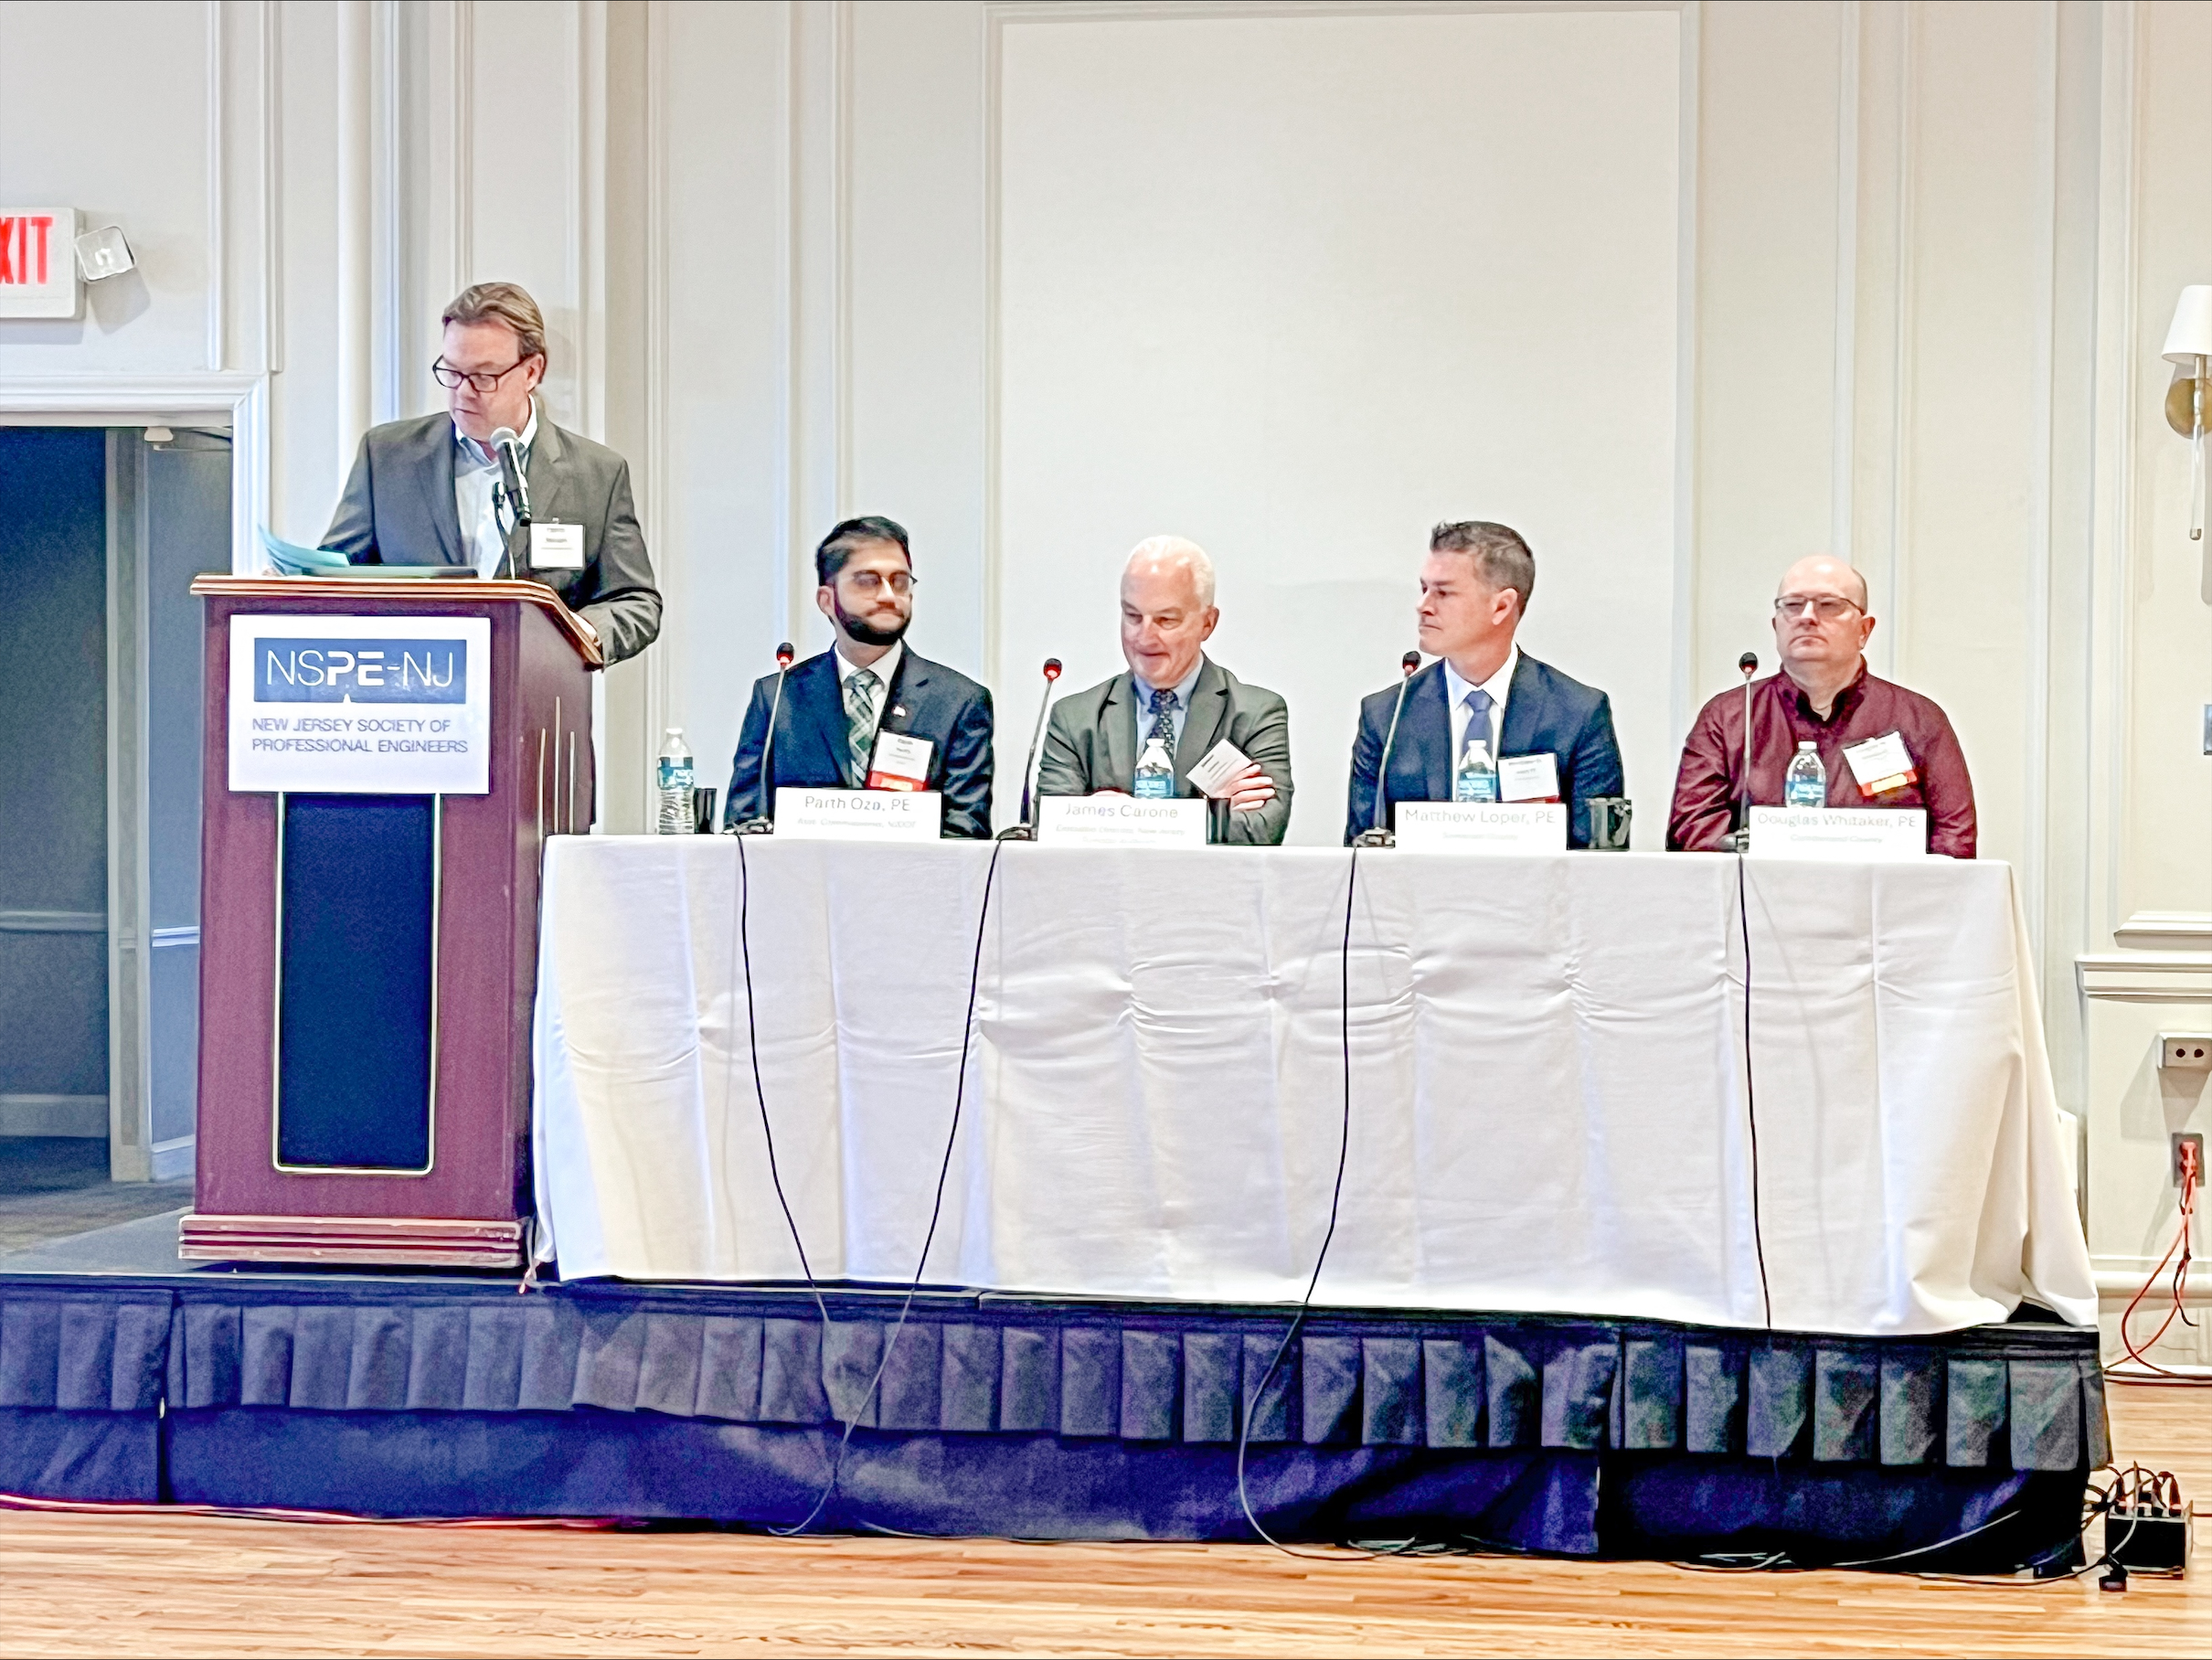 Panel 1 from left to right- Patrick Stewart, NJSPE Executive Director, Parth Oza PE, Asst Commissioner - NJDOT, James Carone, Executive Director – NJ Turnpike, Matthew D. Loper, PE – Somerset County Engineer, Douglas W. Whitaker, PE – Cumberland County Engineer